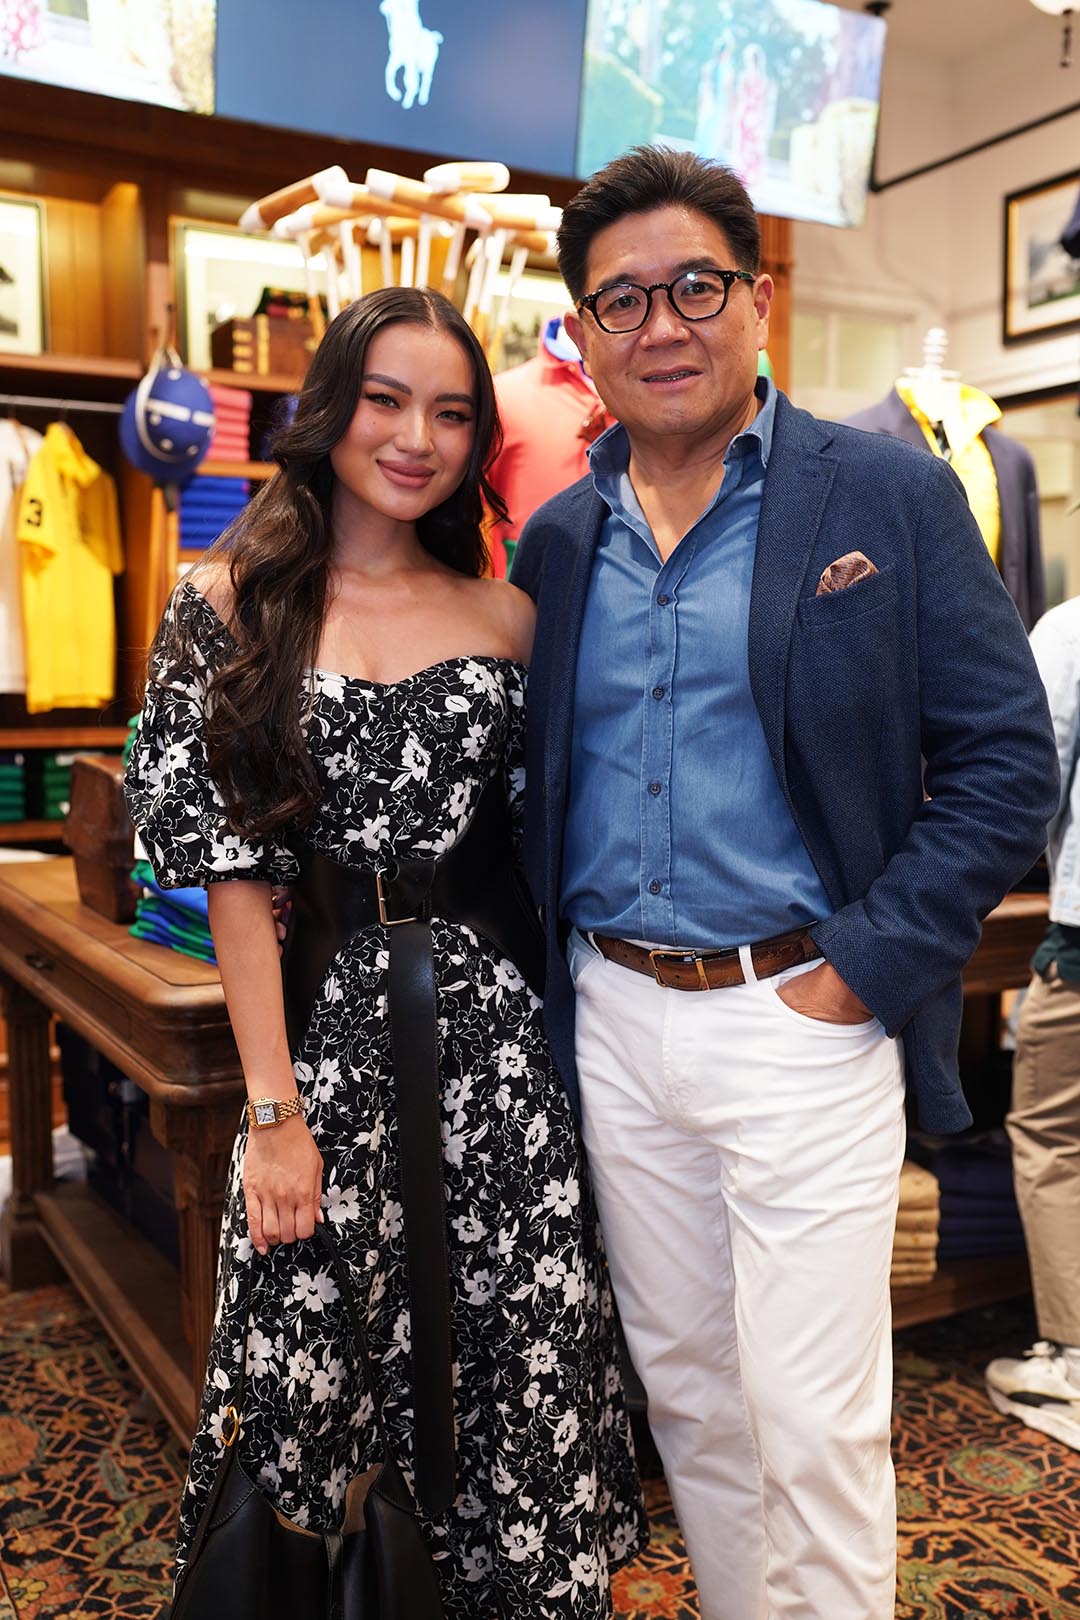 Polo Ralph Lauren Opened Their New Store in Greenbelt 5